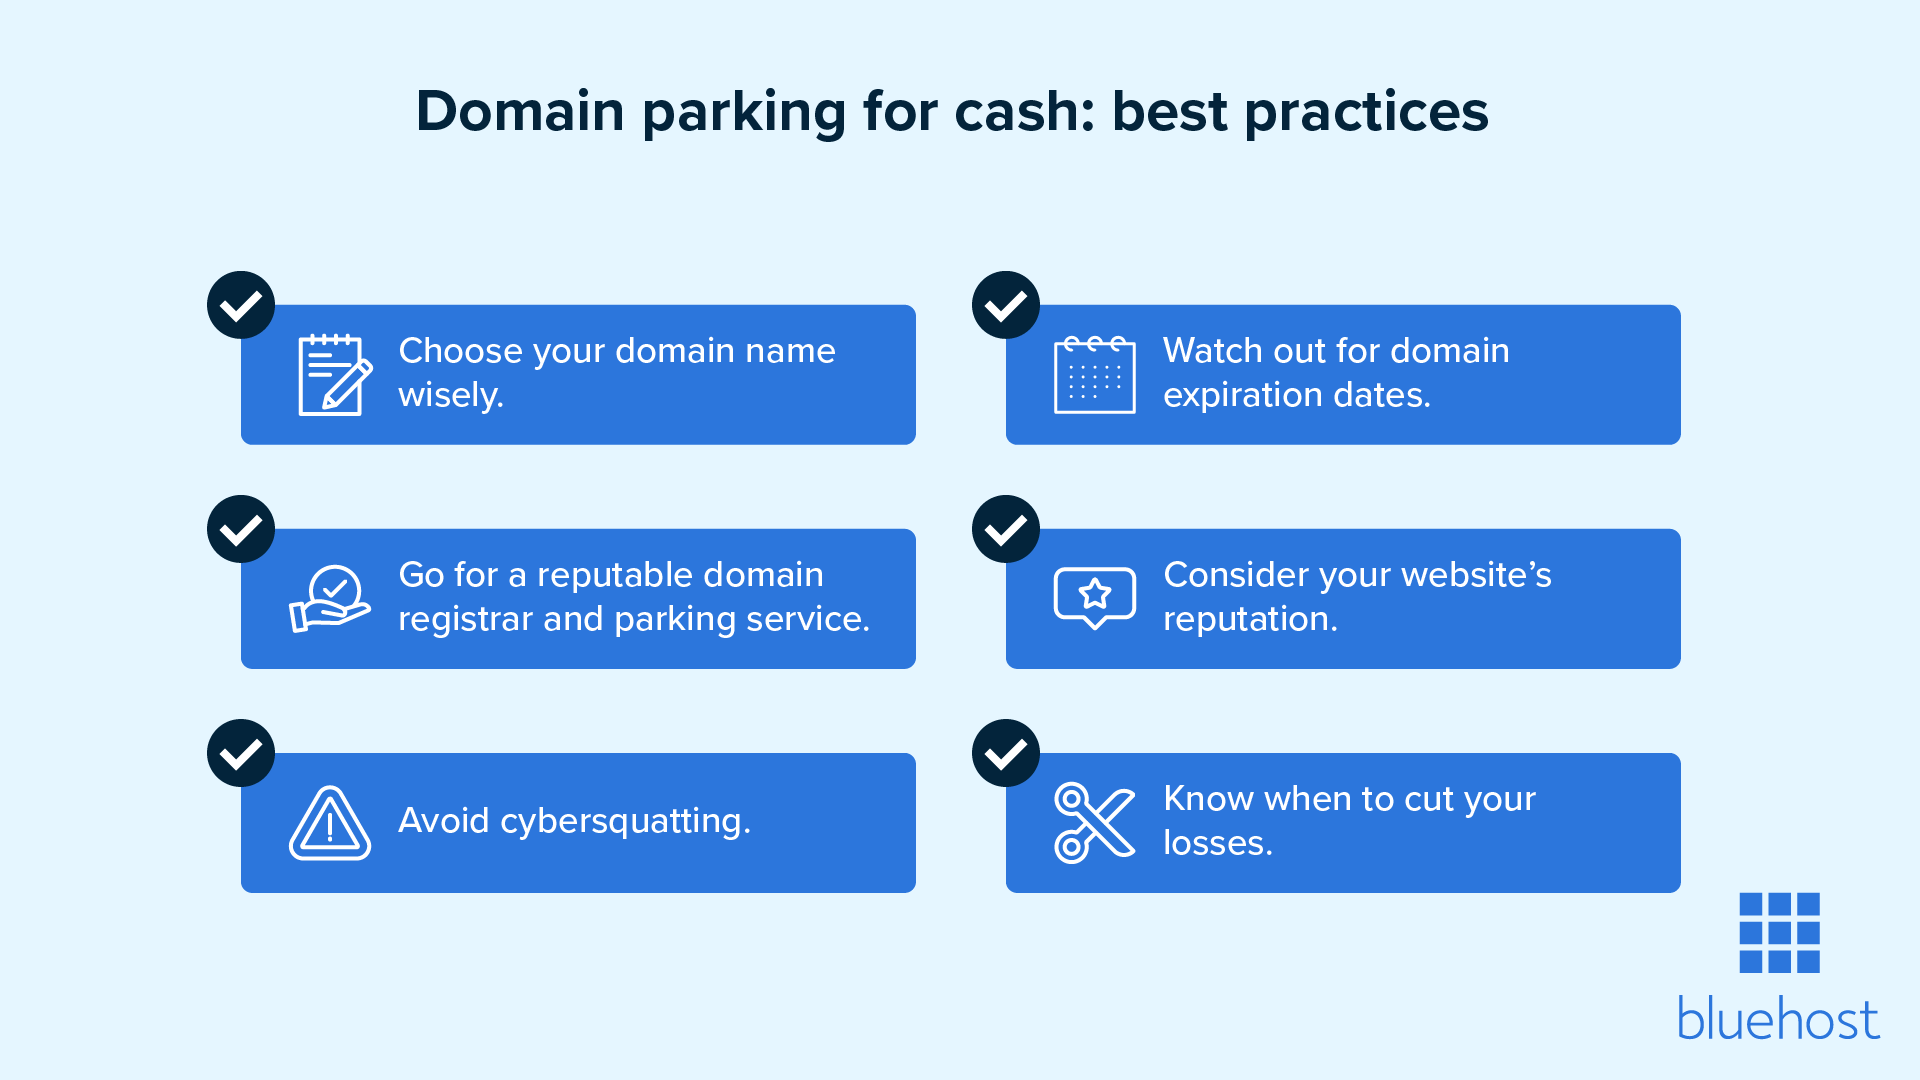 Domain parking could be a good earner for your business if you follow these best practices.